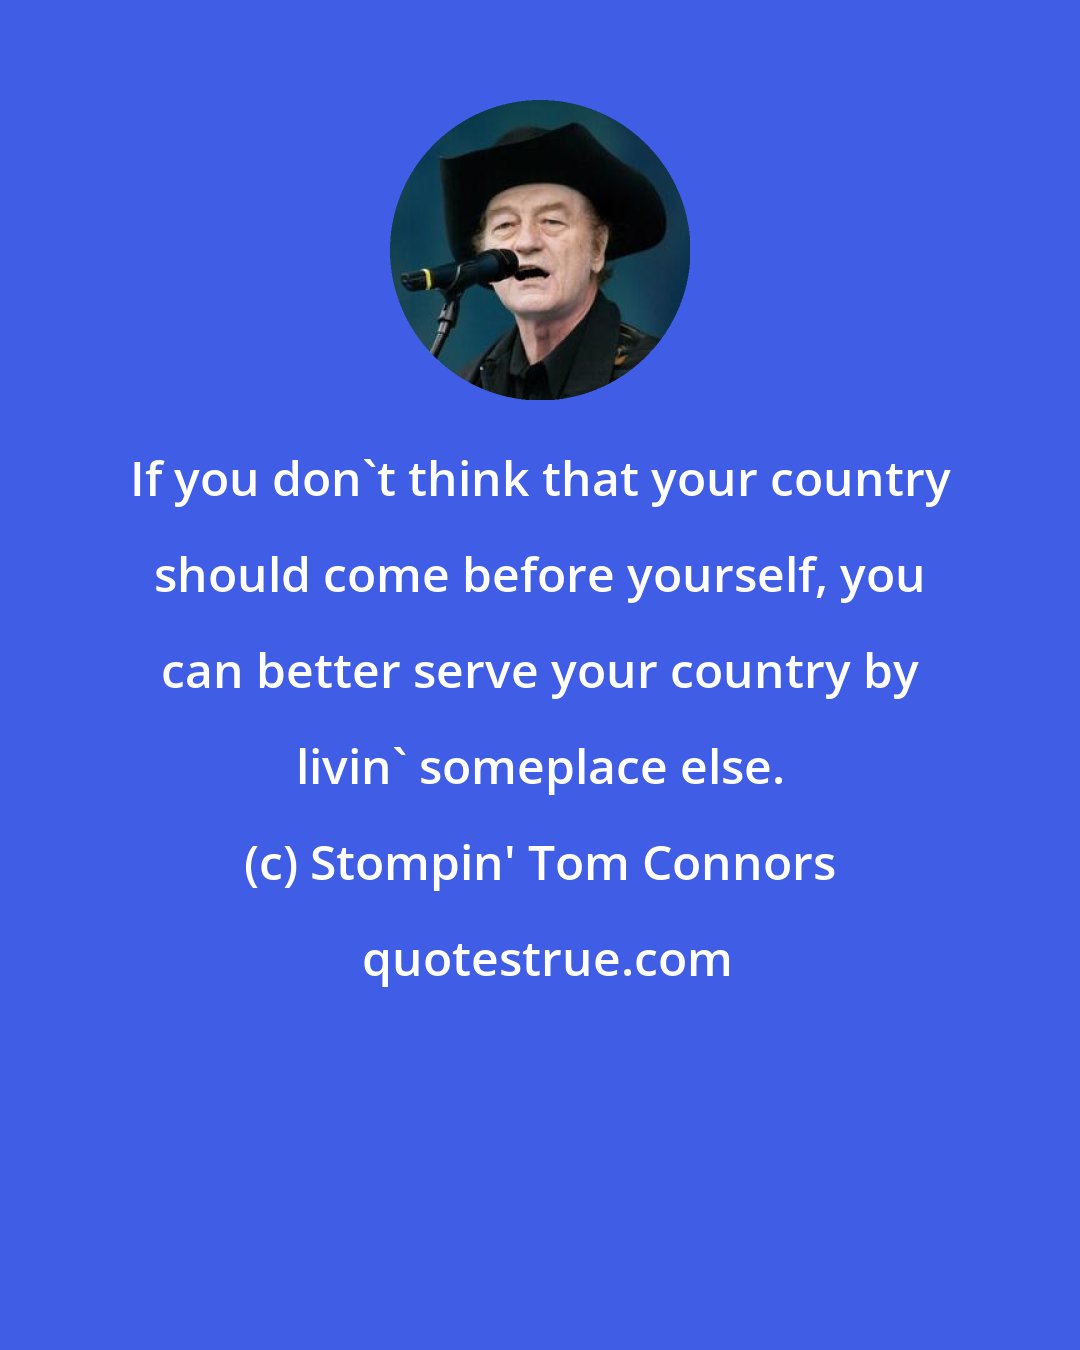 Stompin' Tom Connors: If you don't think that your country should come before yourself, you can better serve your country by livin' someplace else.